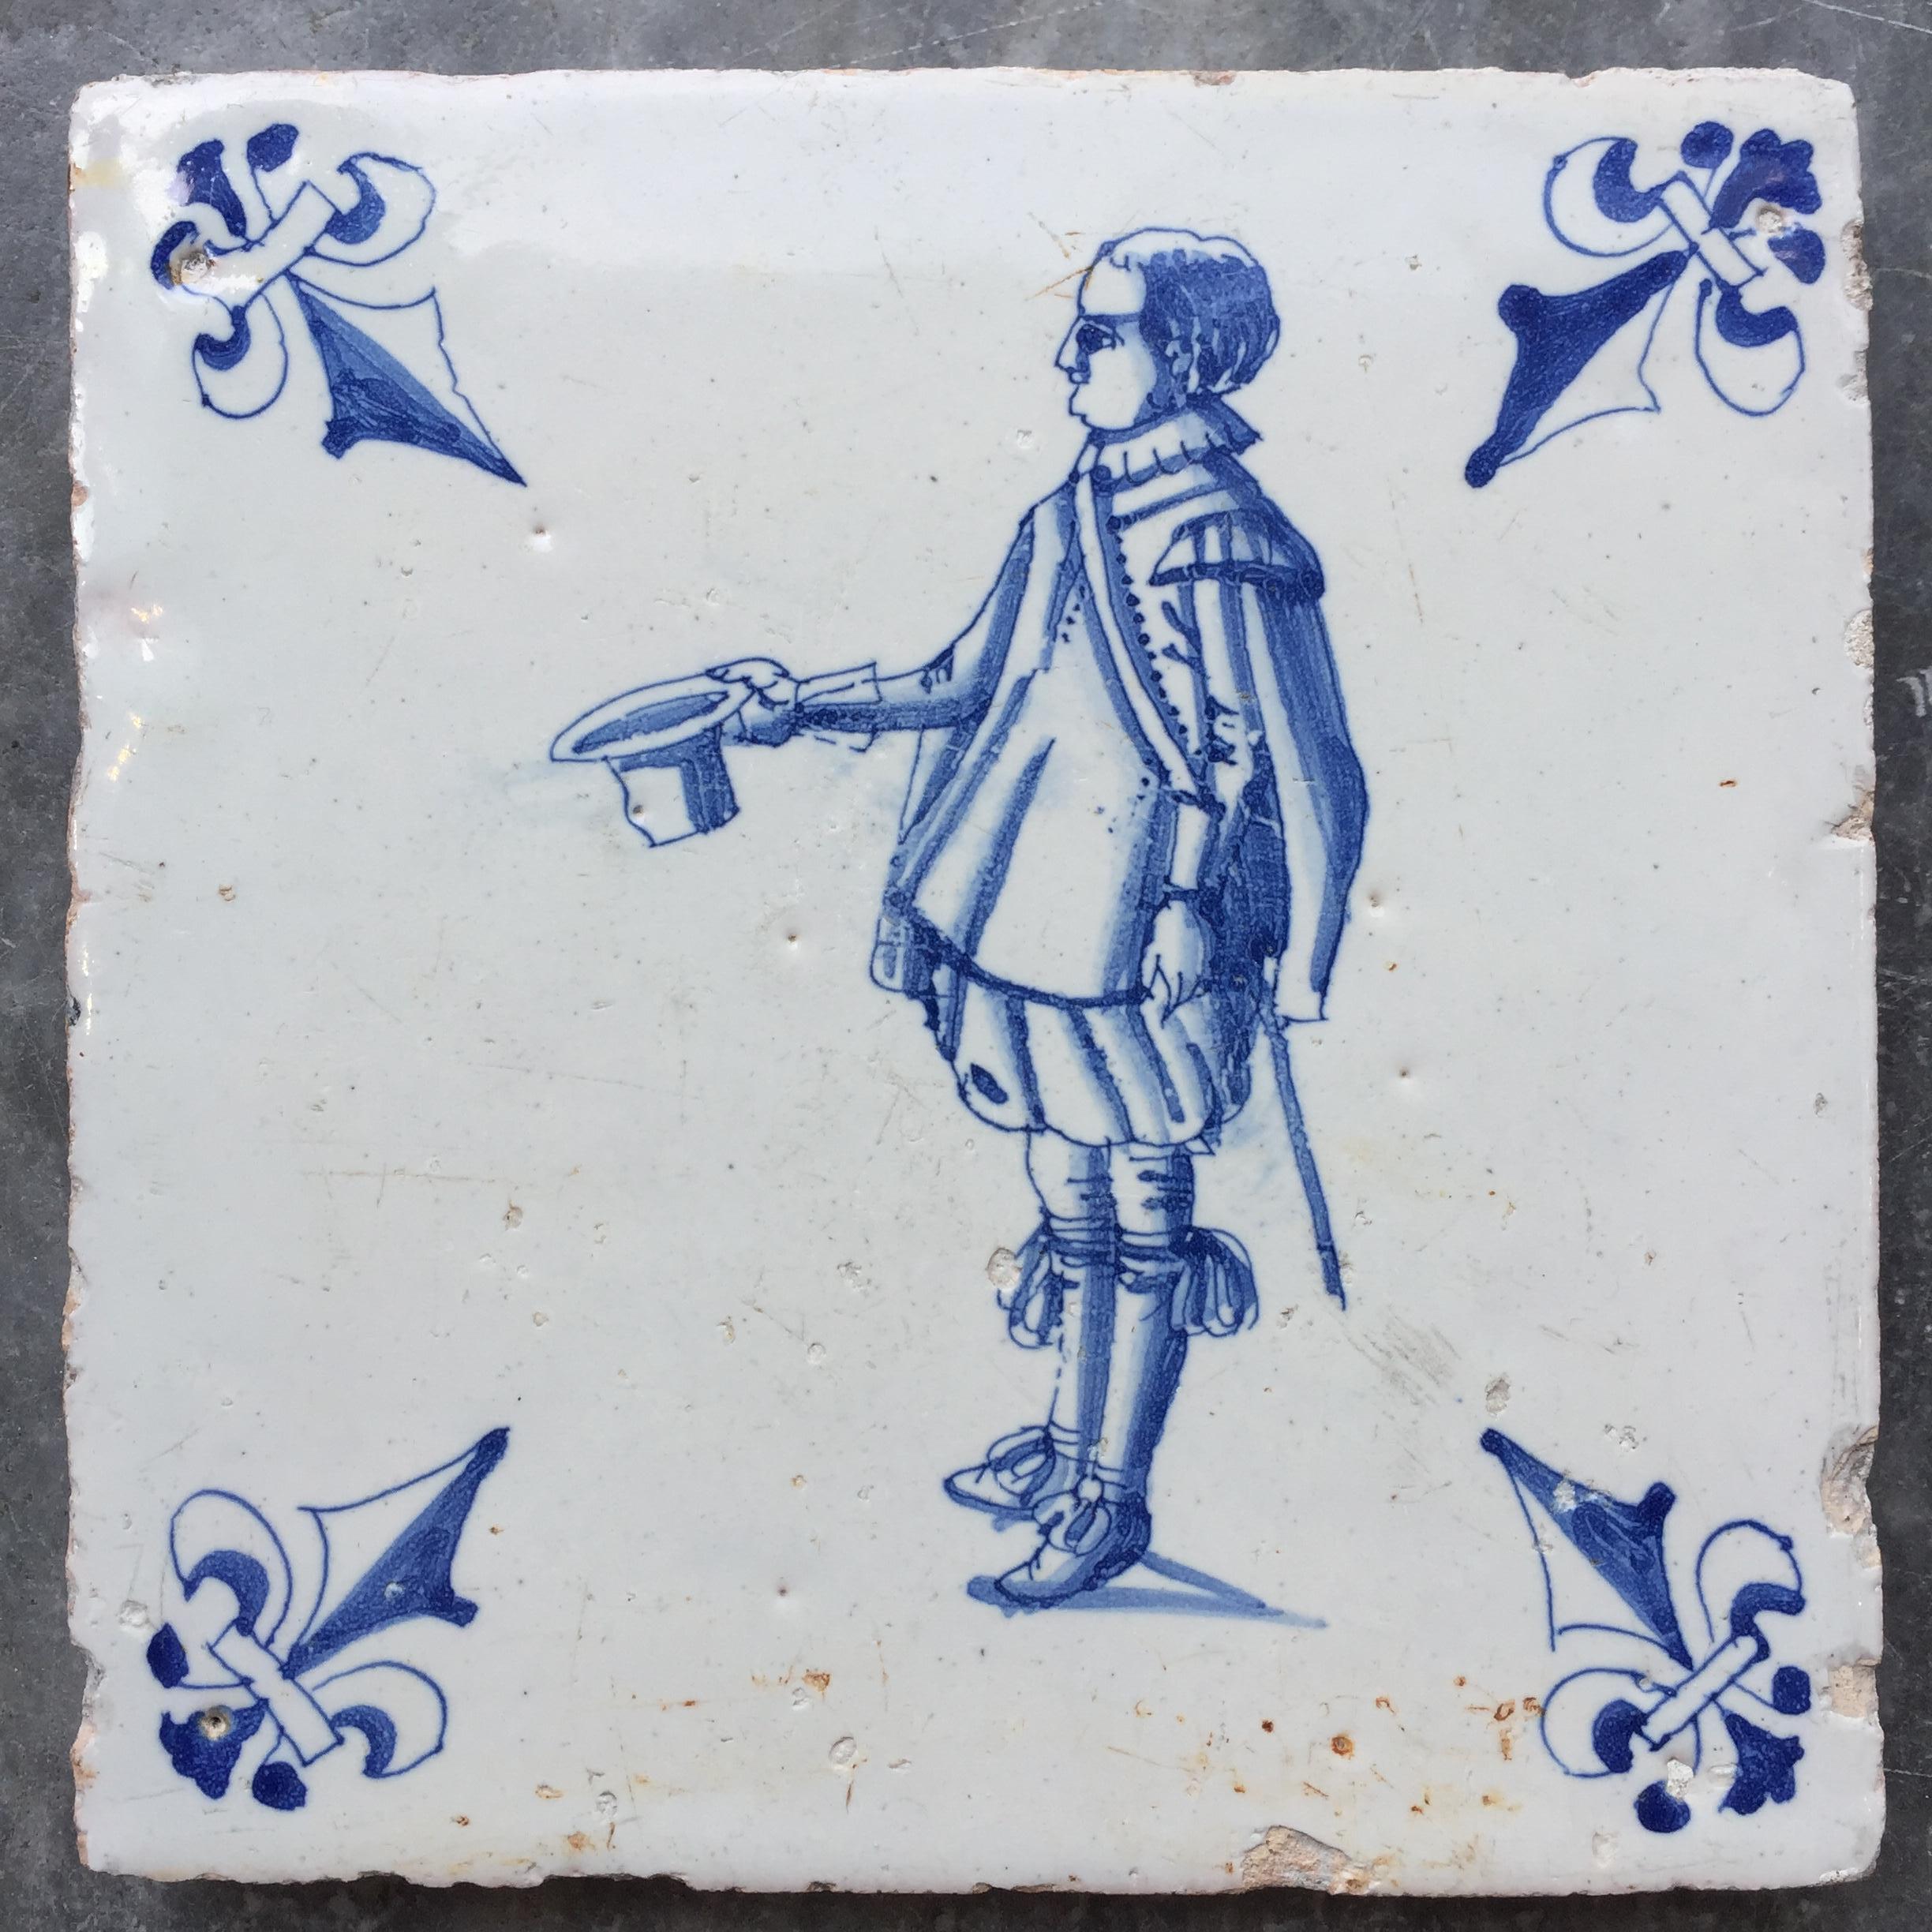 Ceramic Exceptional Set of 20 Blue and White Dutch Delft Tiles with Figures